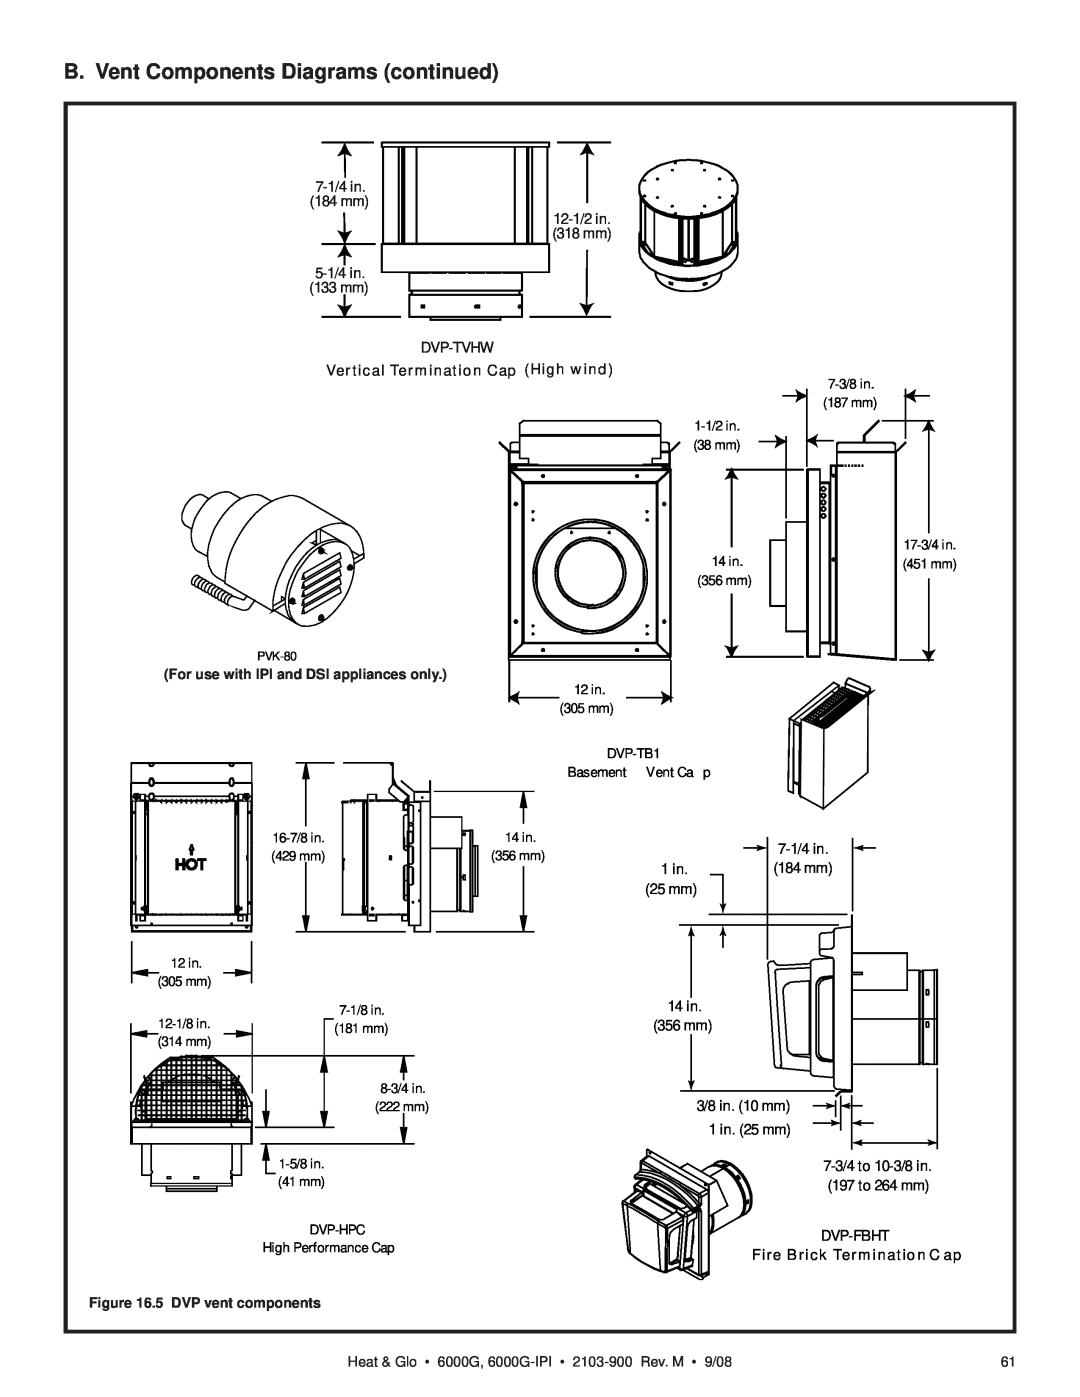 Heat & Glo LifeStyle 6000G-IPILP B. Vent Components Diagrams continued, 7-1/4in, 184 mm, 12-1/2in, 318 mm, 5-1/4in, 133 mm 